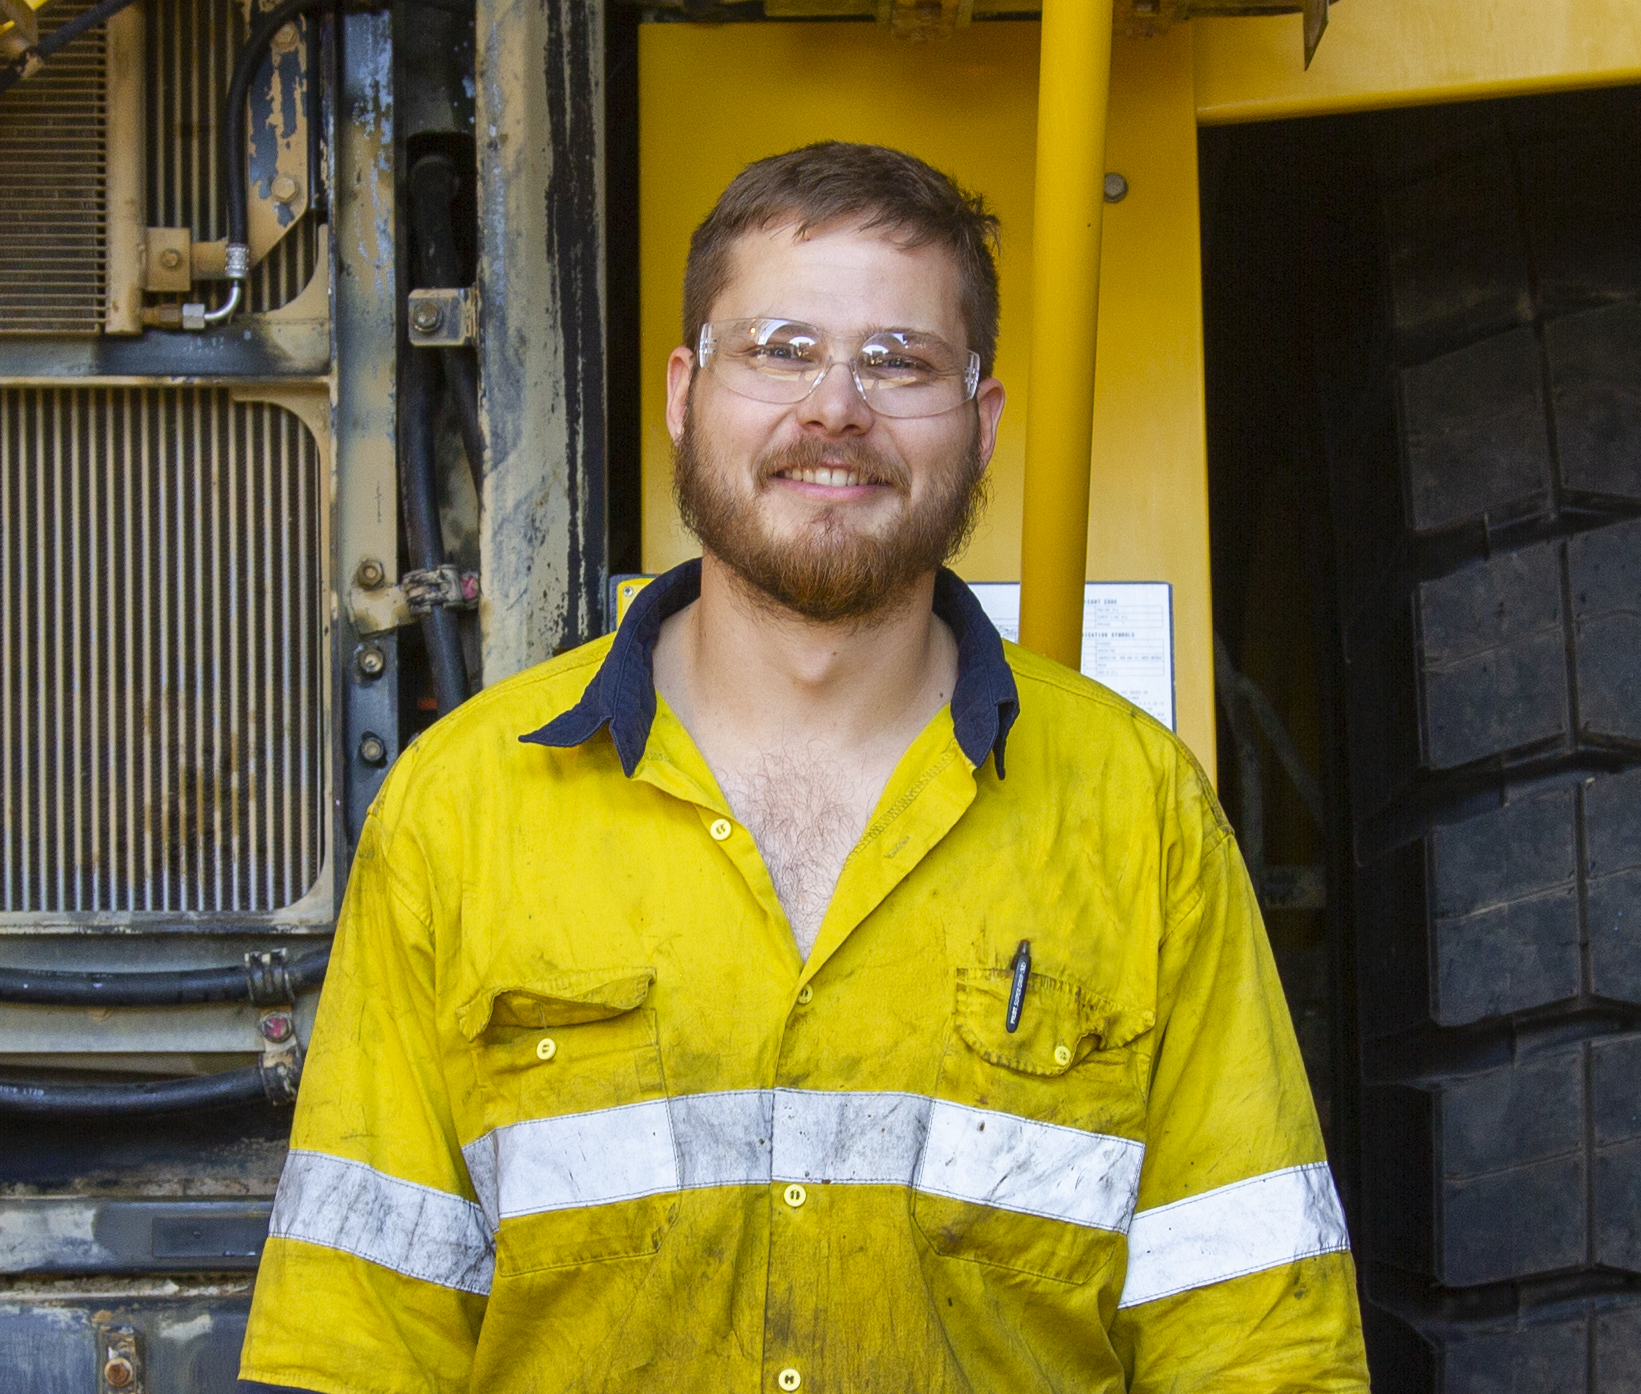 <em>Jenaro</em> - Hired, upskilled and now working for Blue Tongue as a Heavy Mobile Plant Technician at NRW Mining & Civil 1